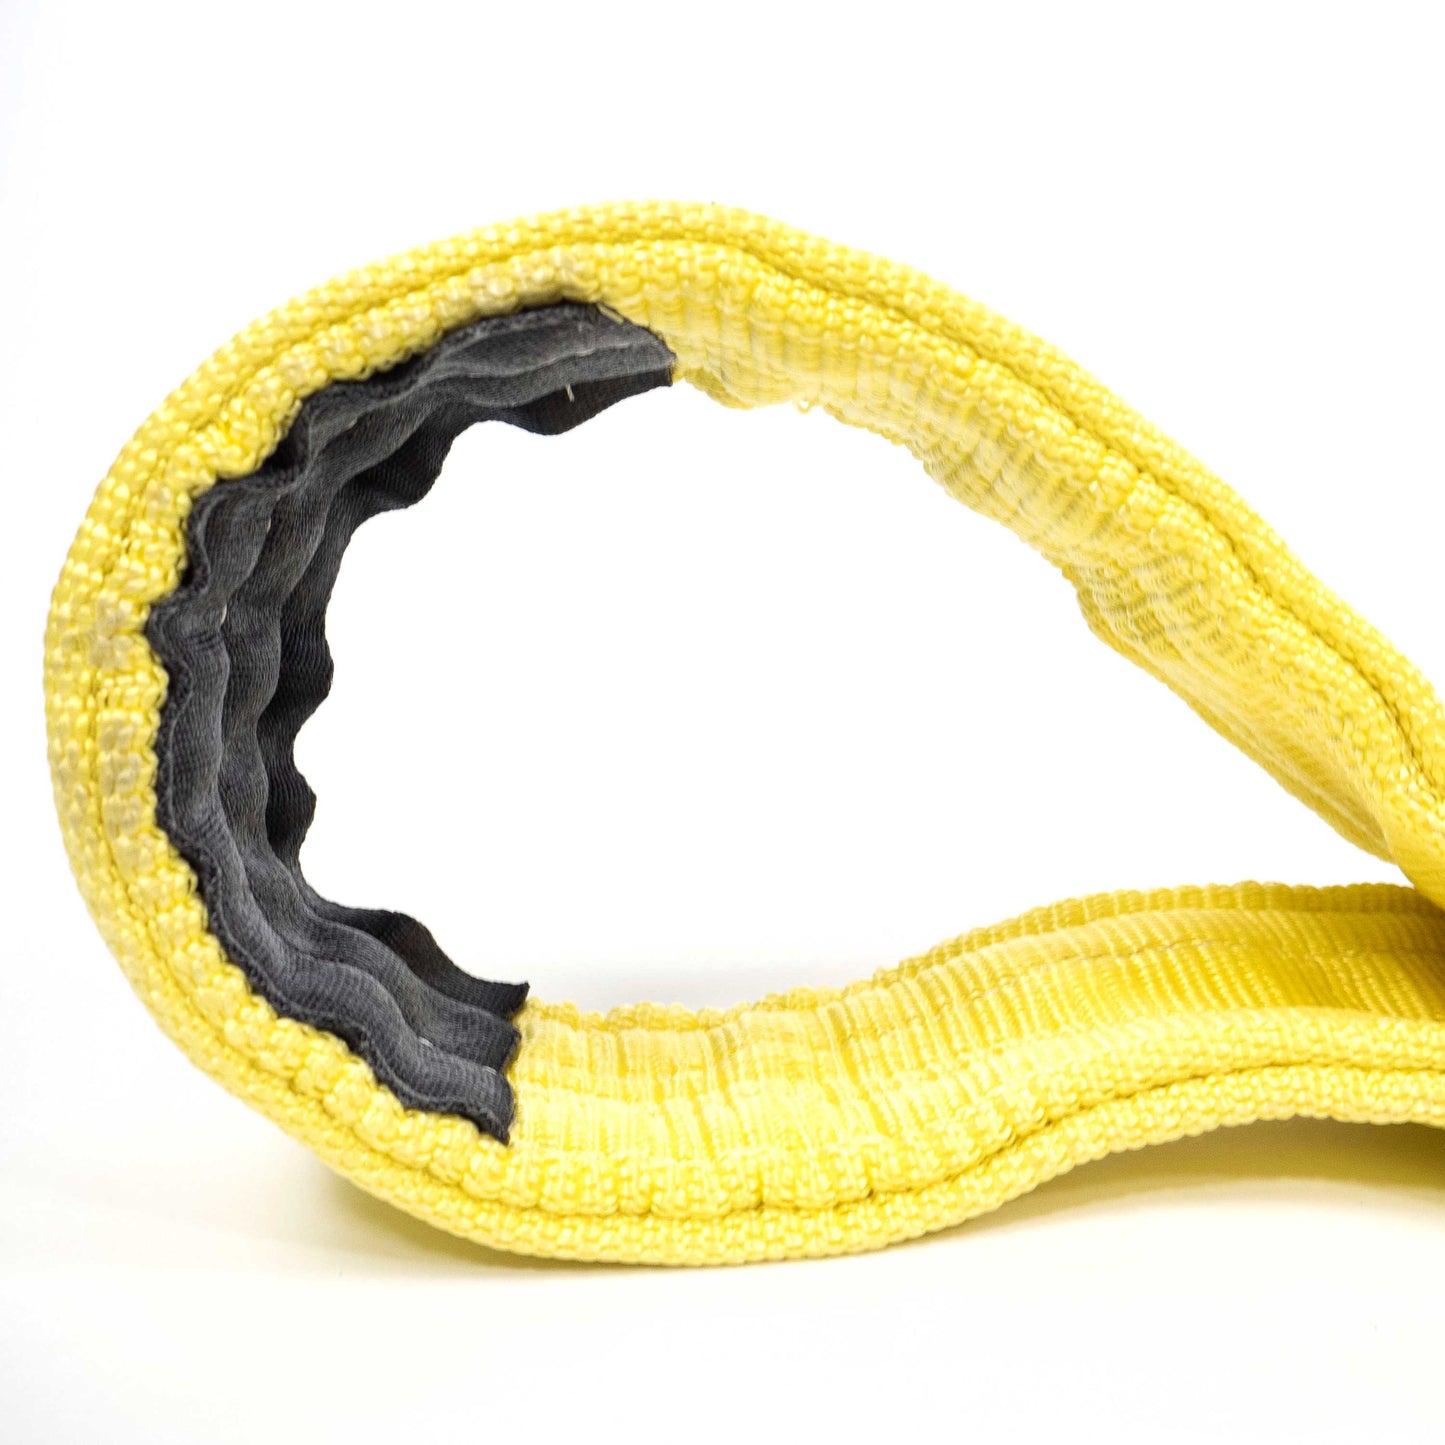 8" x 30' Heavy Duty Recovery Strap with Reinforced Cordura Eyes - 4 Ply | 102,500 WLL